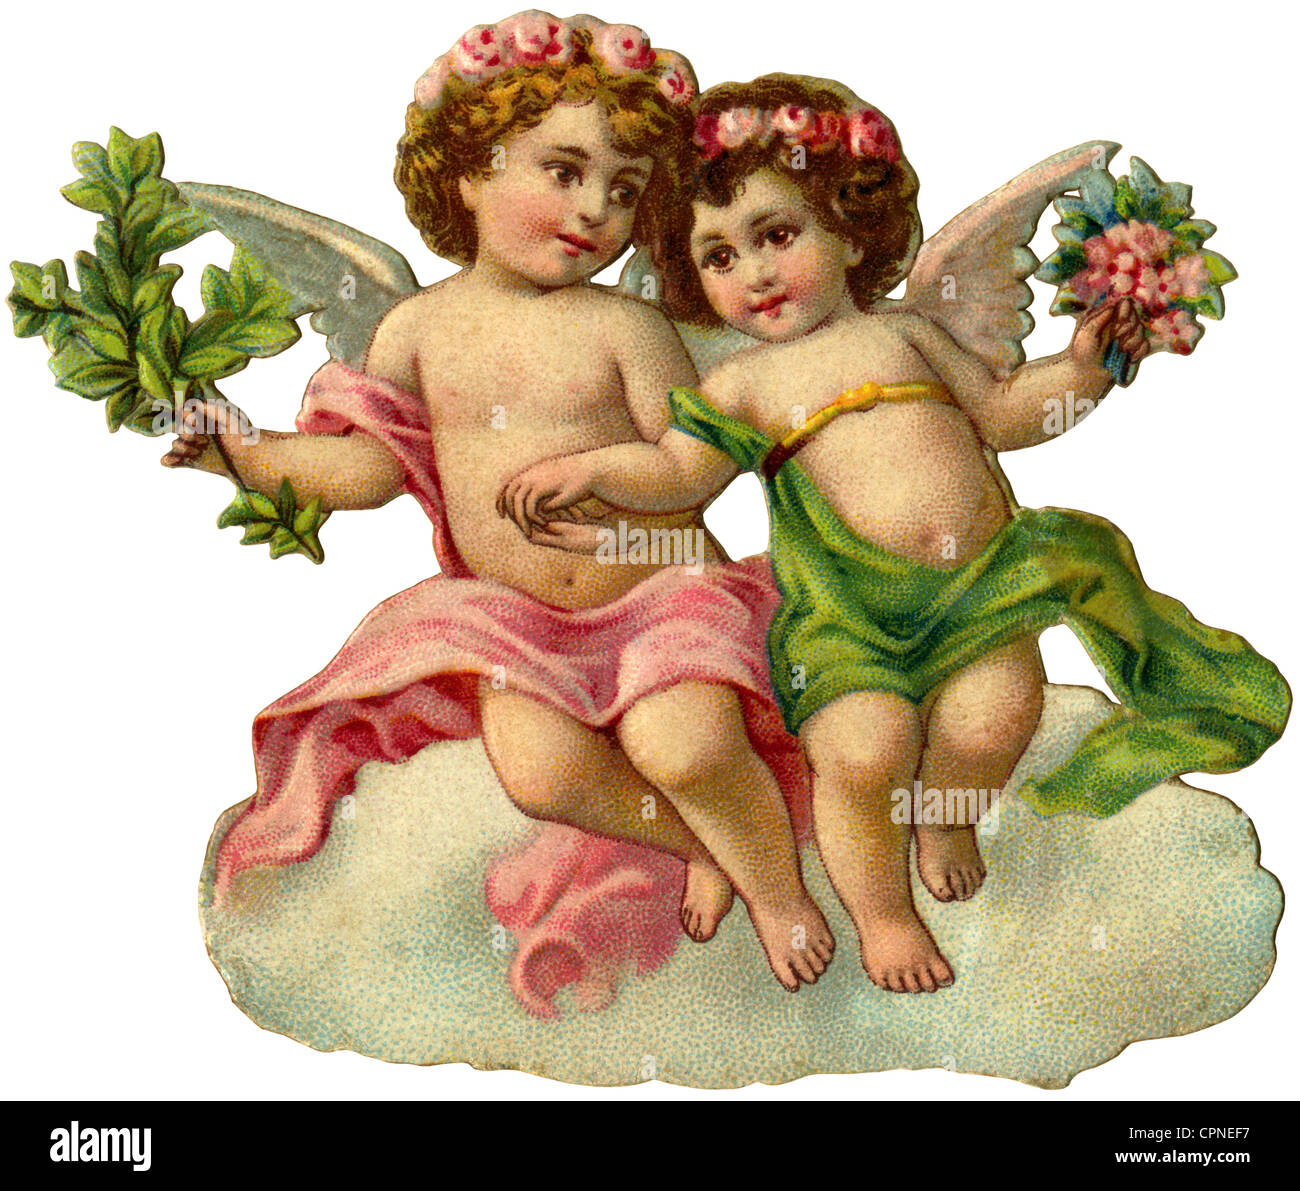 Kitsch, due piccoli angeli, rottame-picture, Germania, 1908, Additional-Rights-Clearences-not available Foto Stock